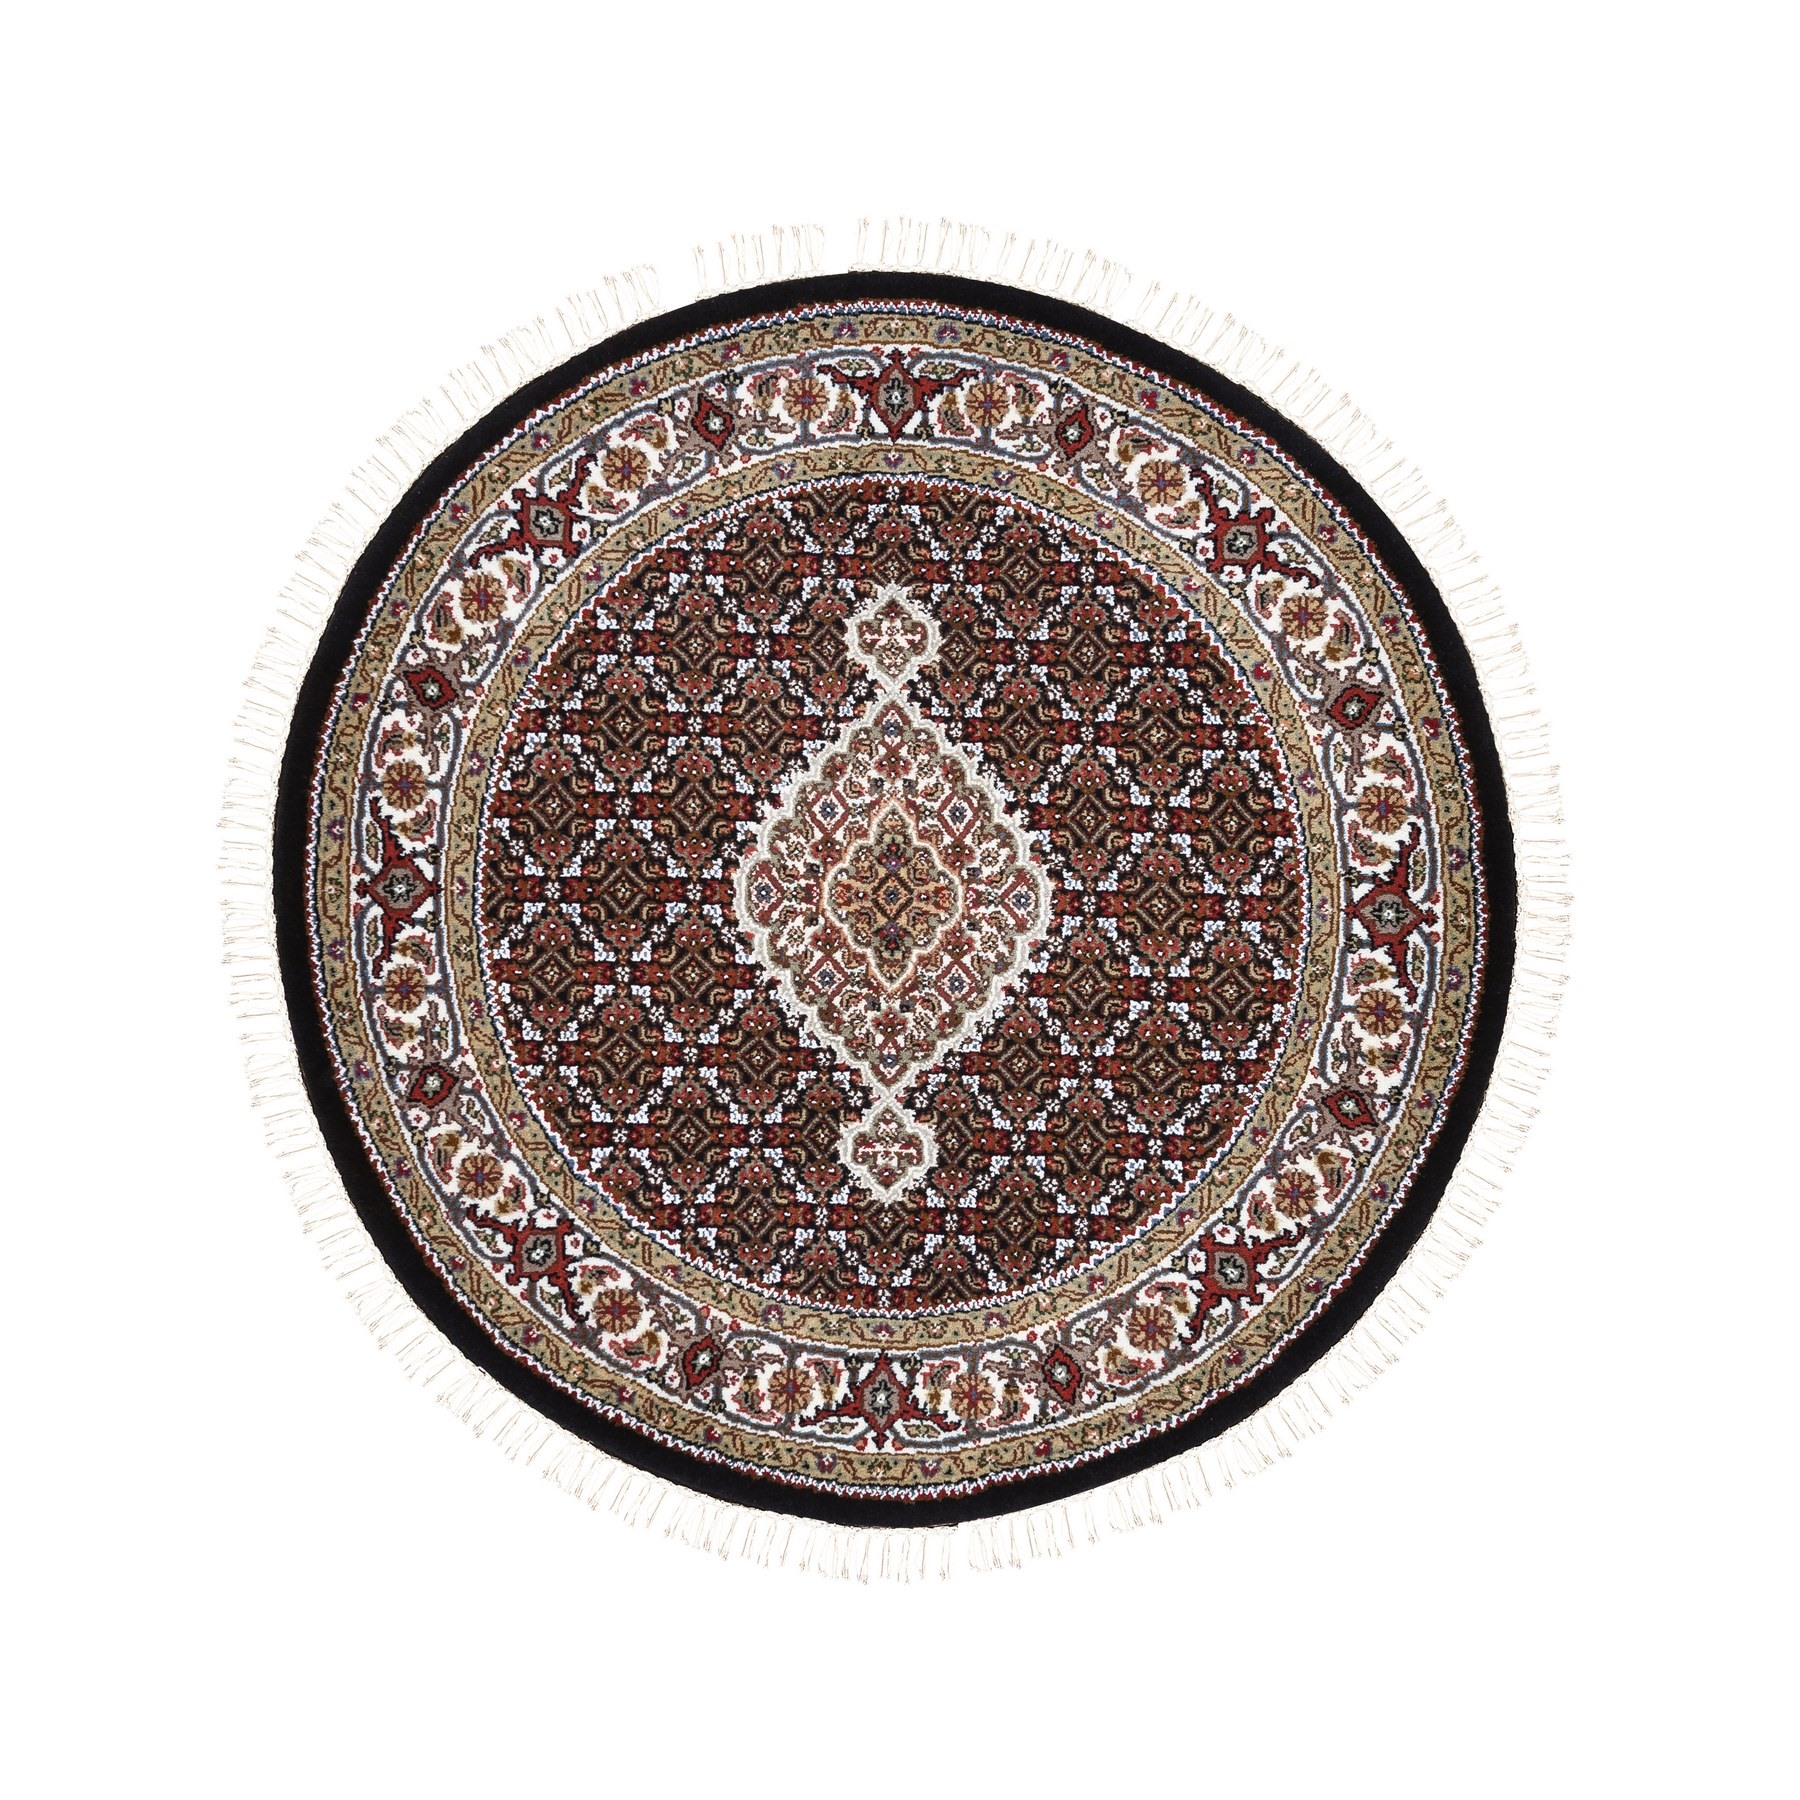 Pirniakan Collection Hand Knotted Black Rug No: 1124890